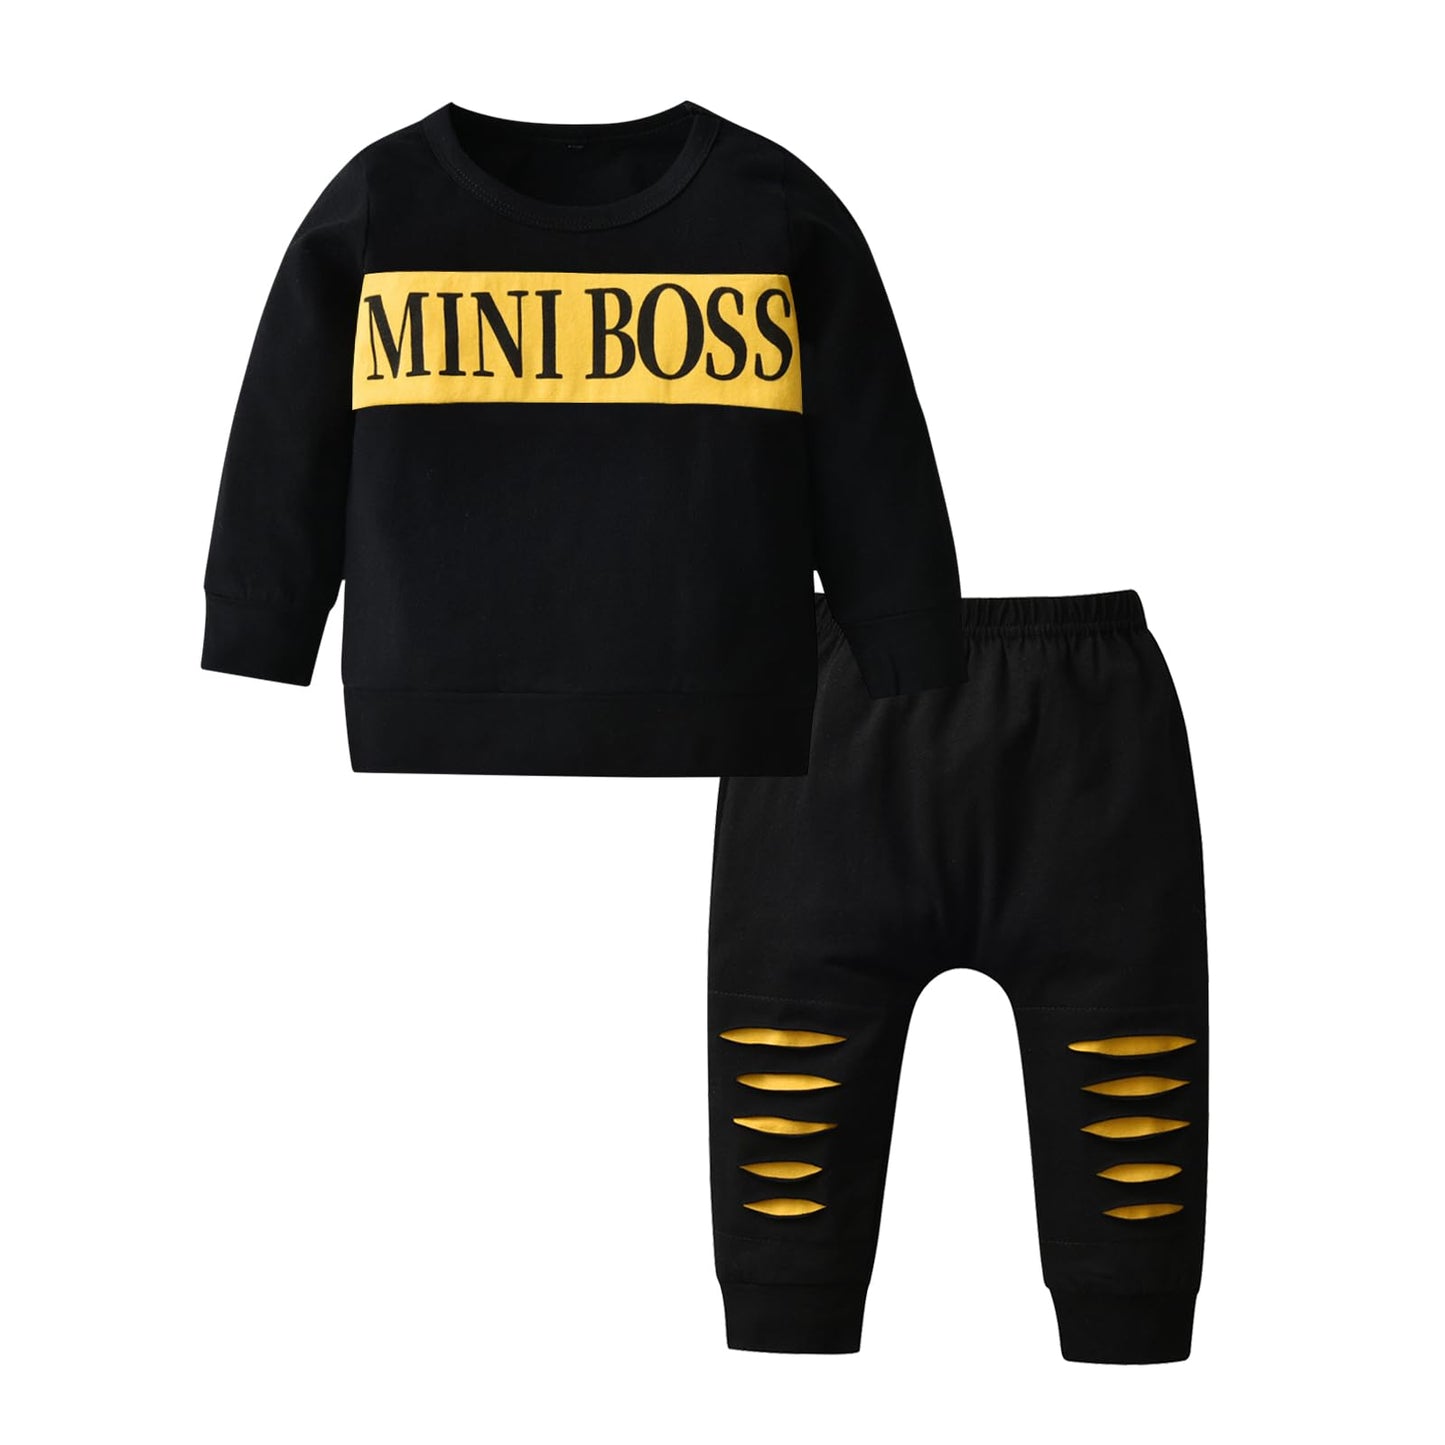 Planooar Baby Clothing Set Baby Boys Clothing Outfit Short Sleeve Letter Print T-Shirt Top + Trousers Clothing (0-6 Months)